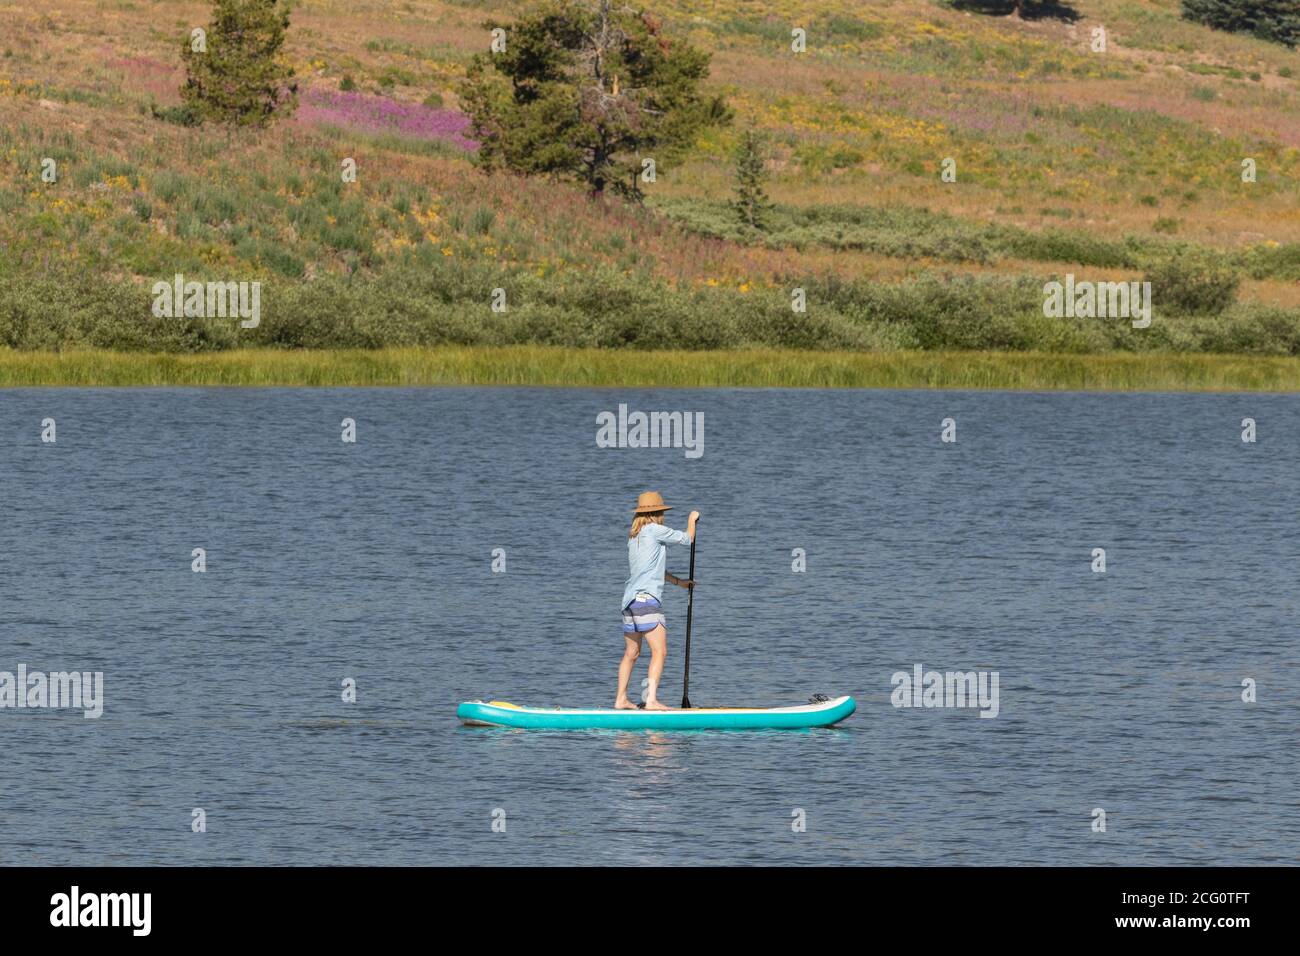 Paddleboarding the High Country Stock Photo